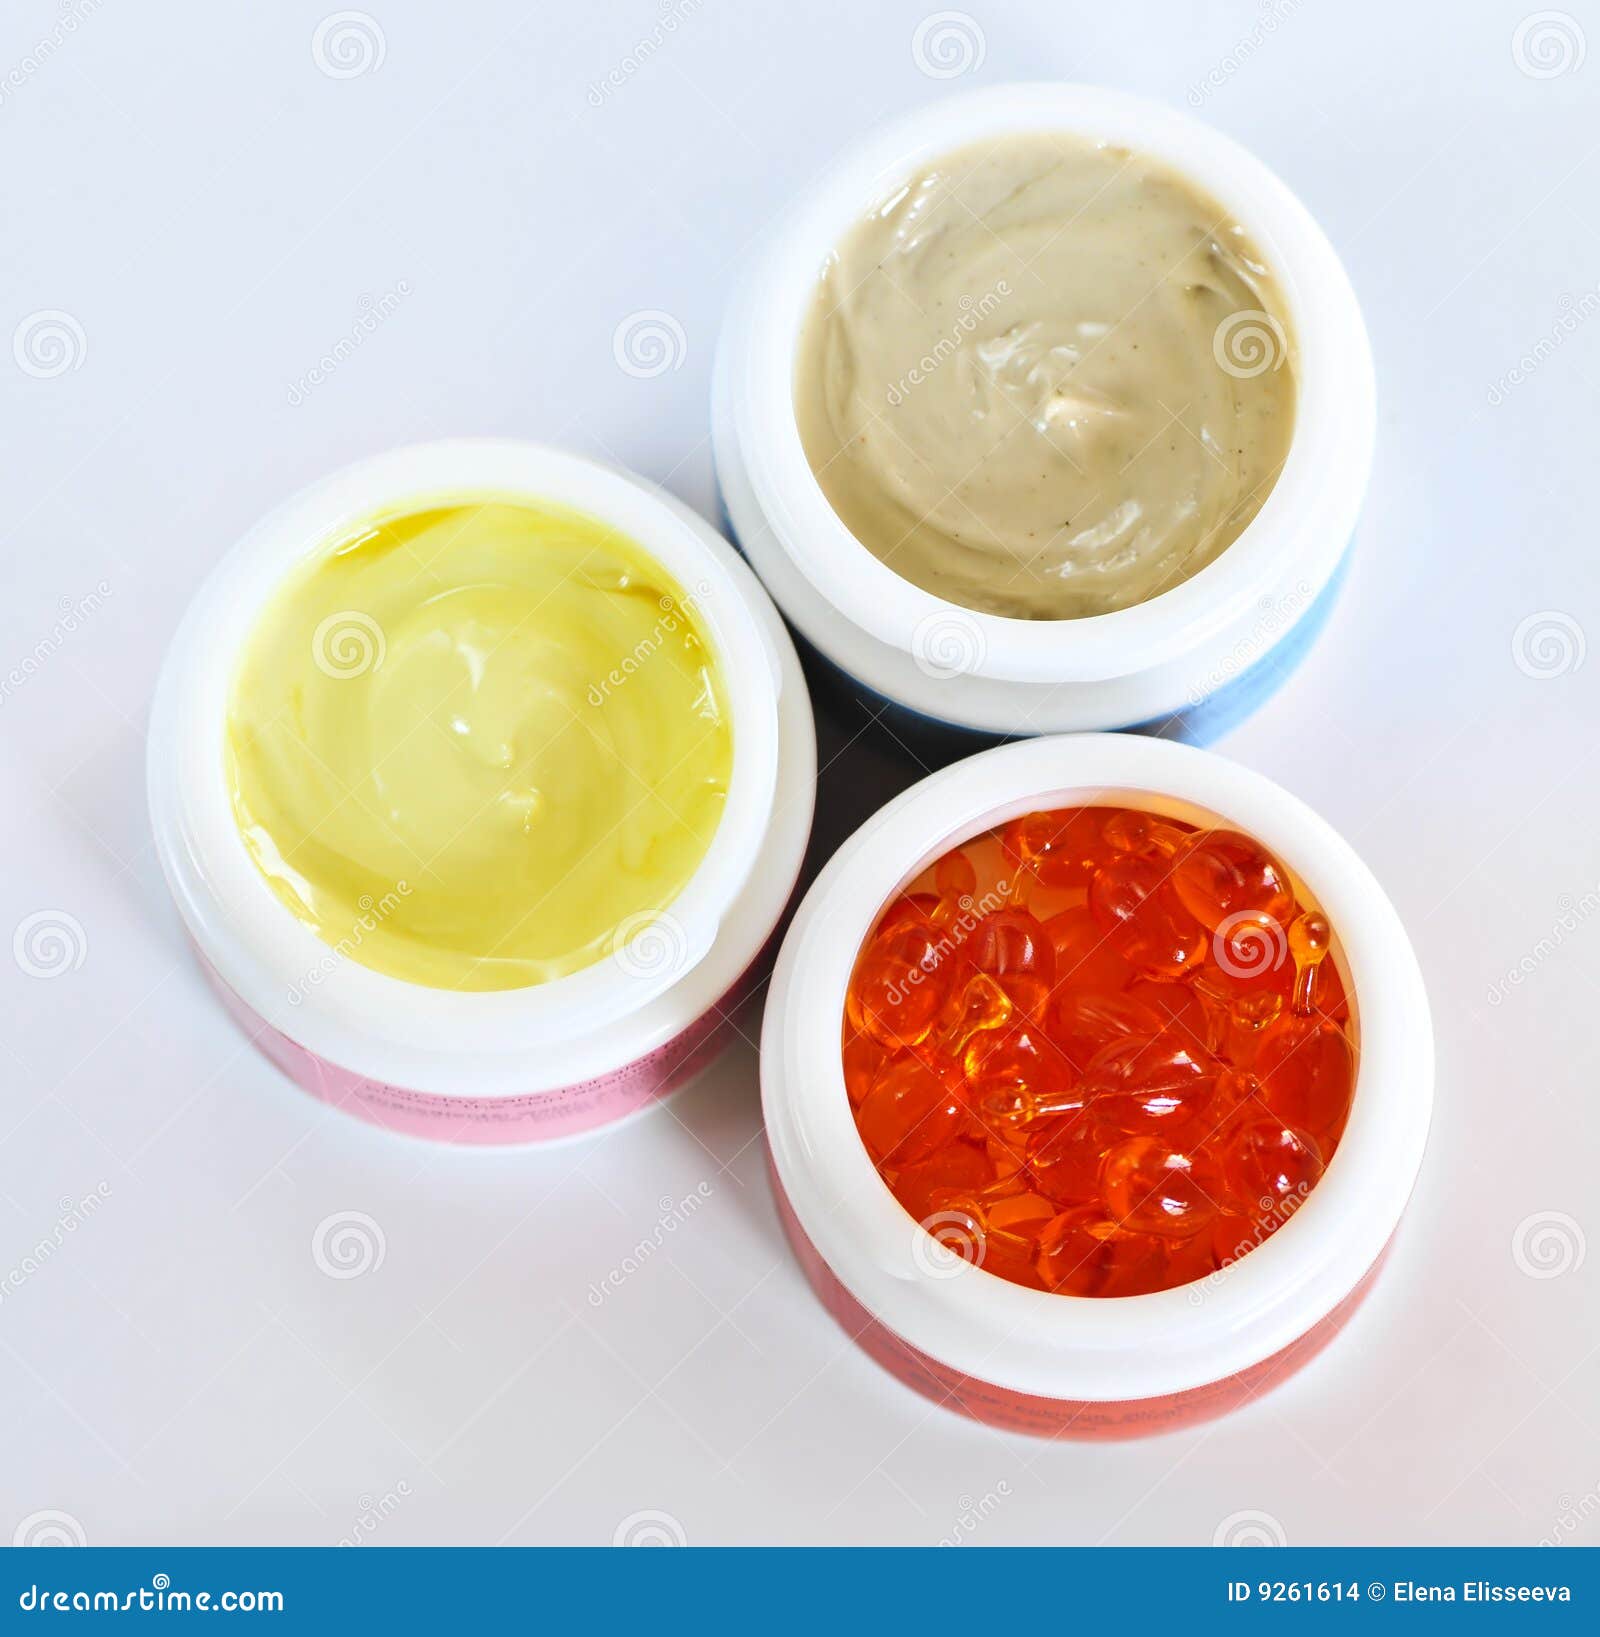 Skin care creams stock photo. Image of beauty, detail - 9261614